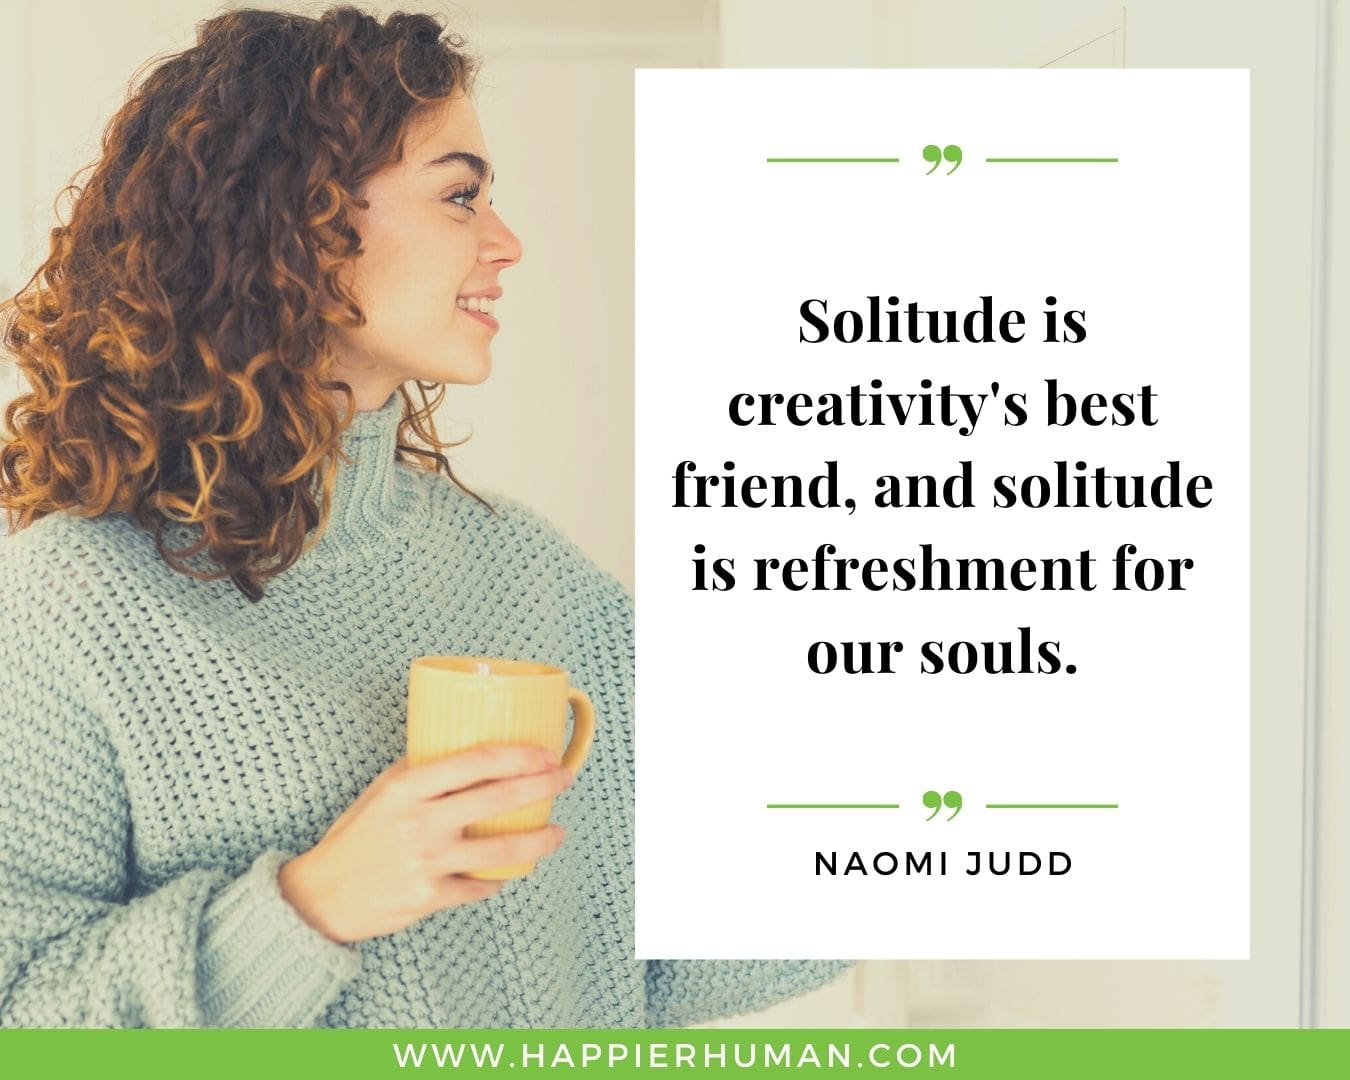 Loneliness Quotes - “Solitude is creativity's best friend, and solitude is refreshment for our souls.”– Naomi Judd